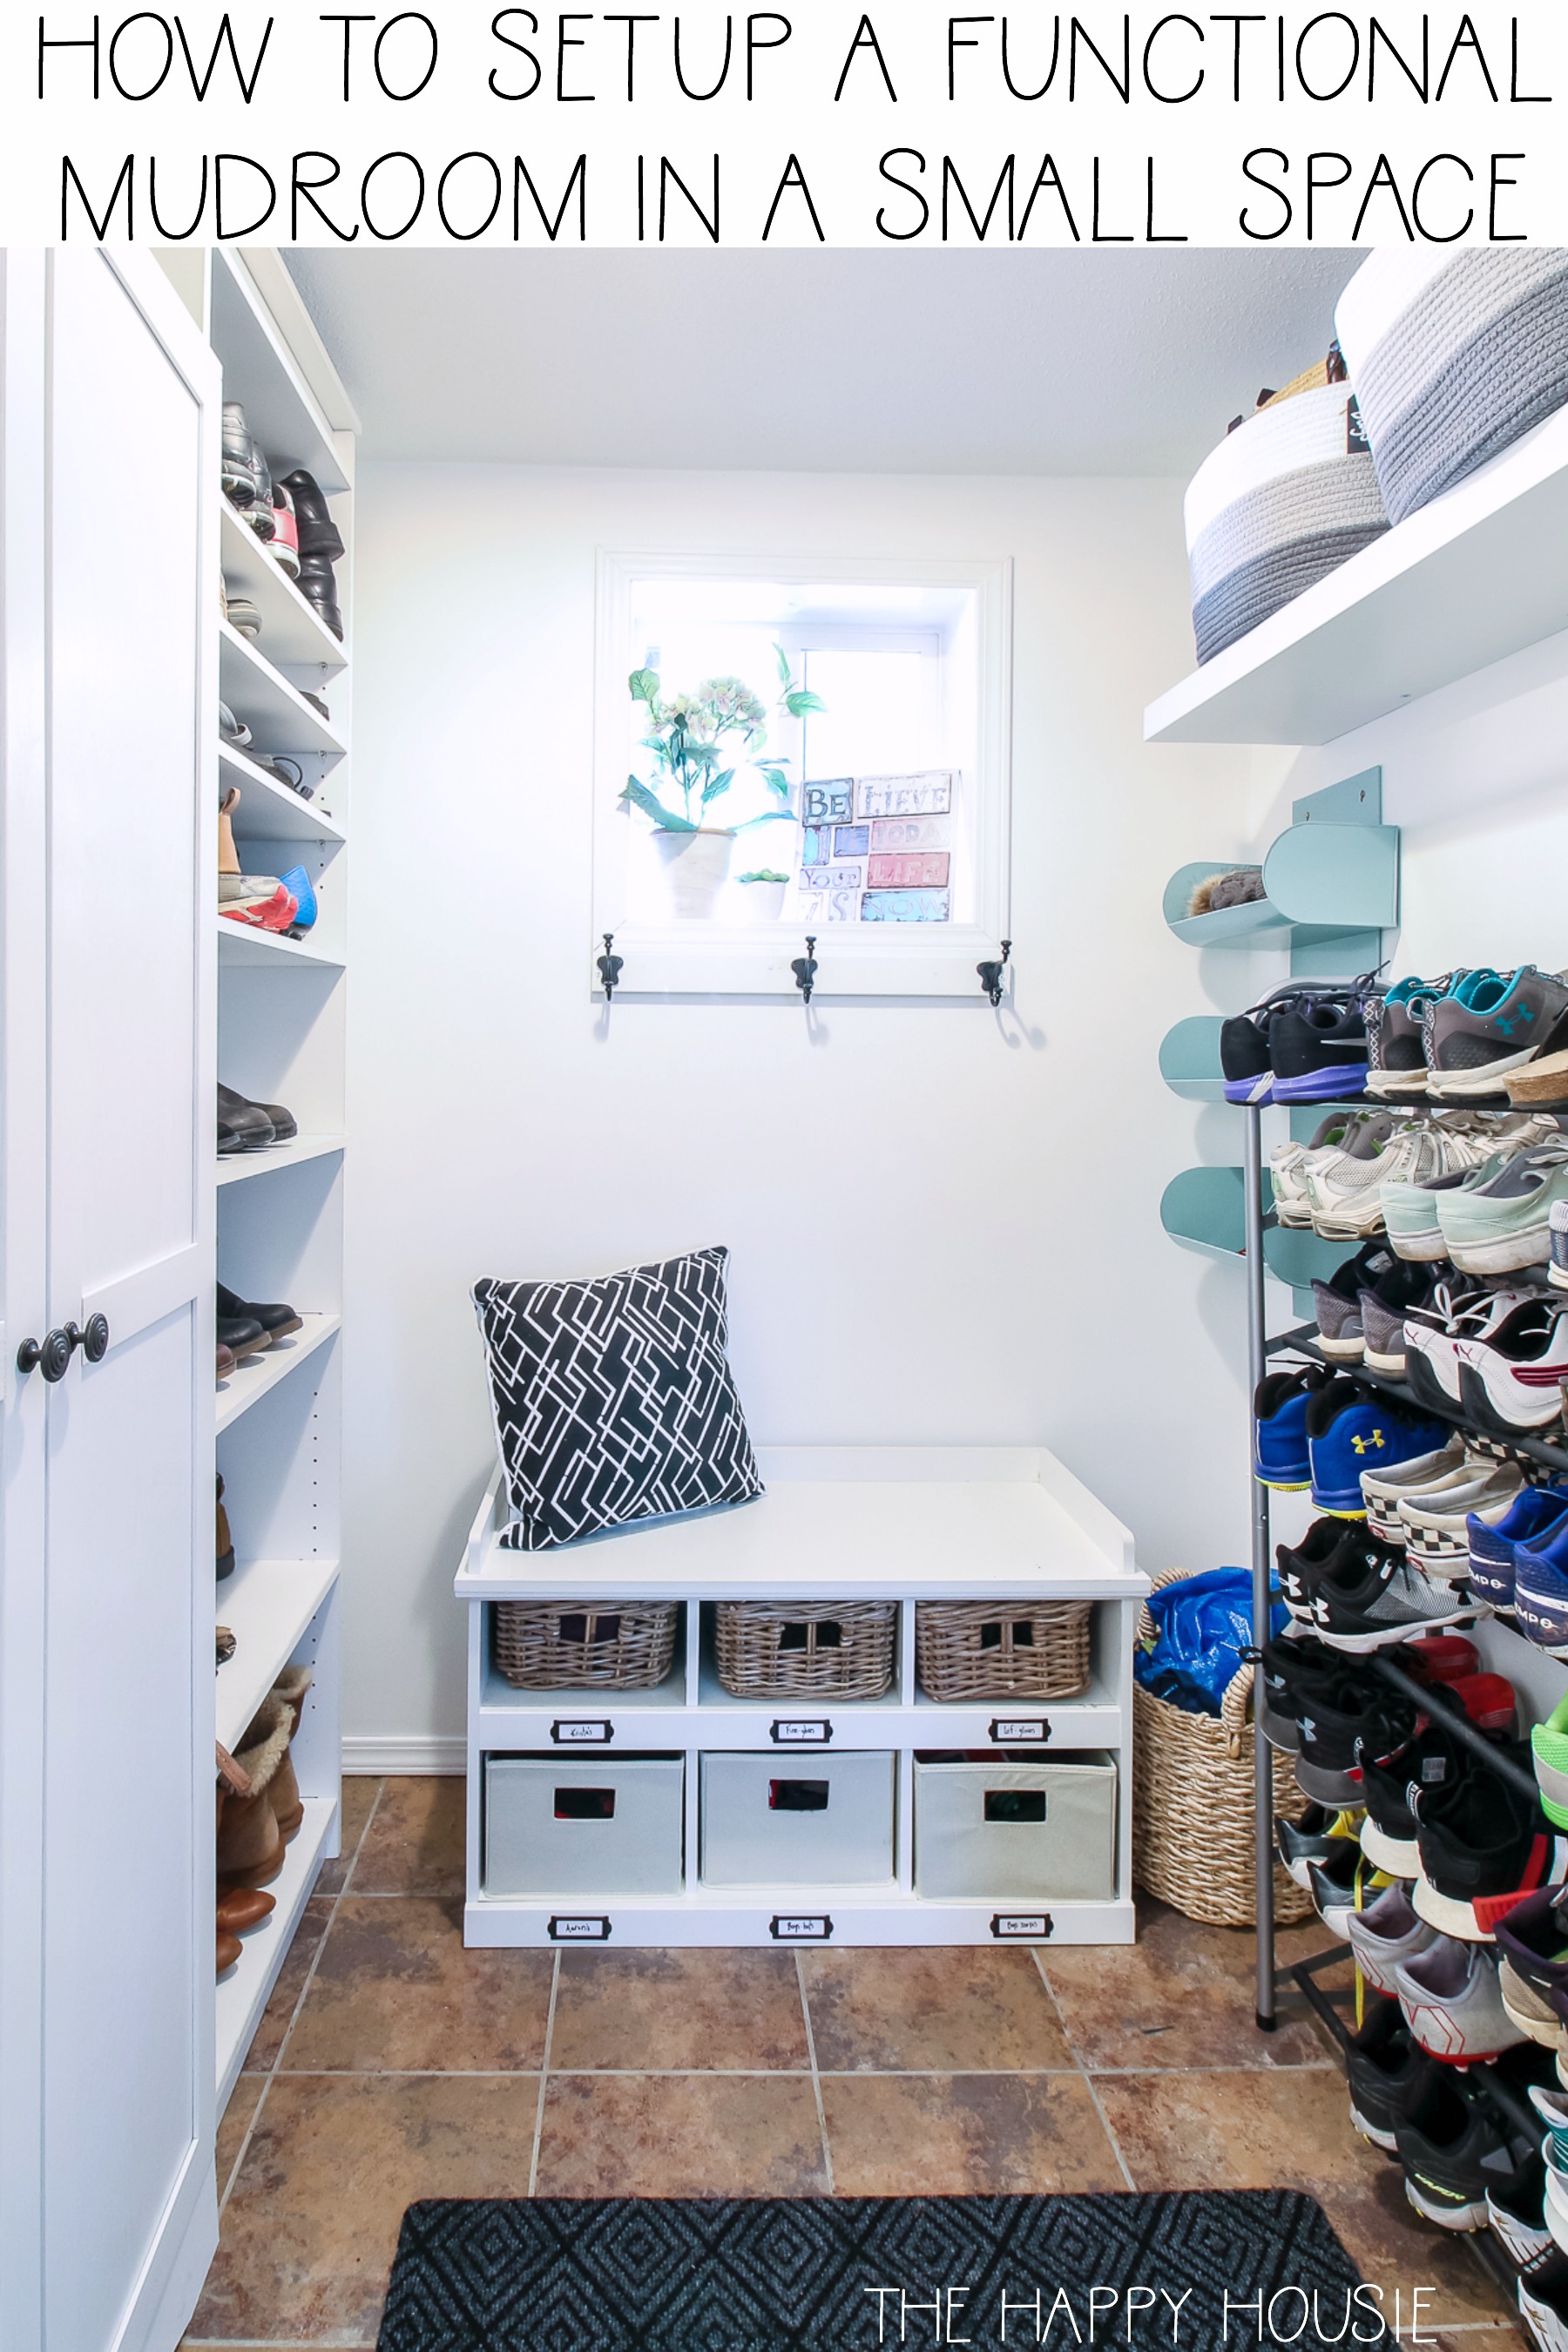 How To Set Up A Functional Mudroom In A Small Space poster.